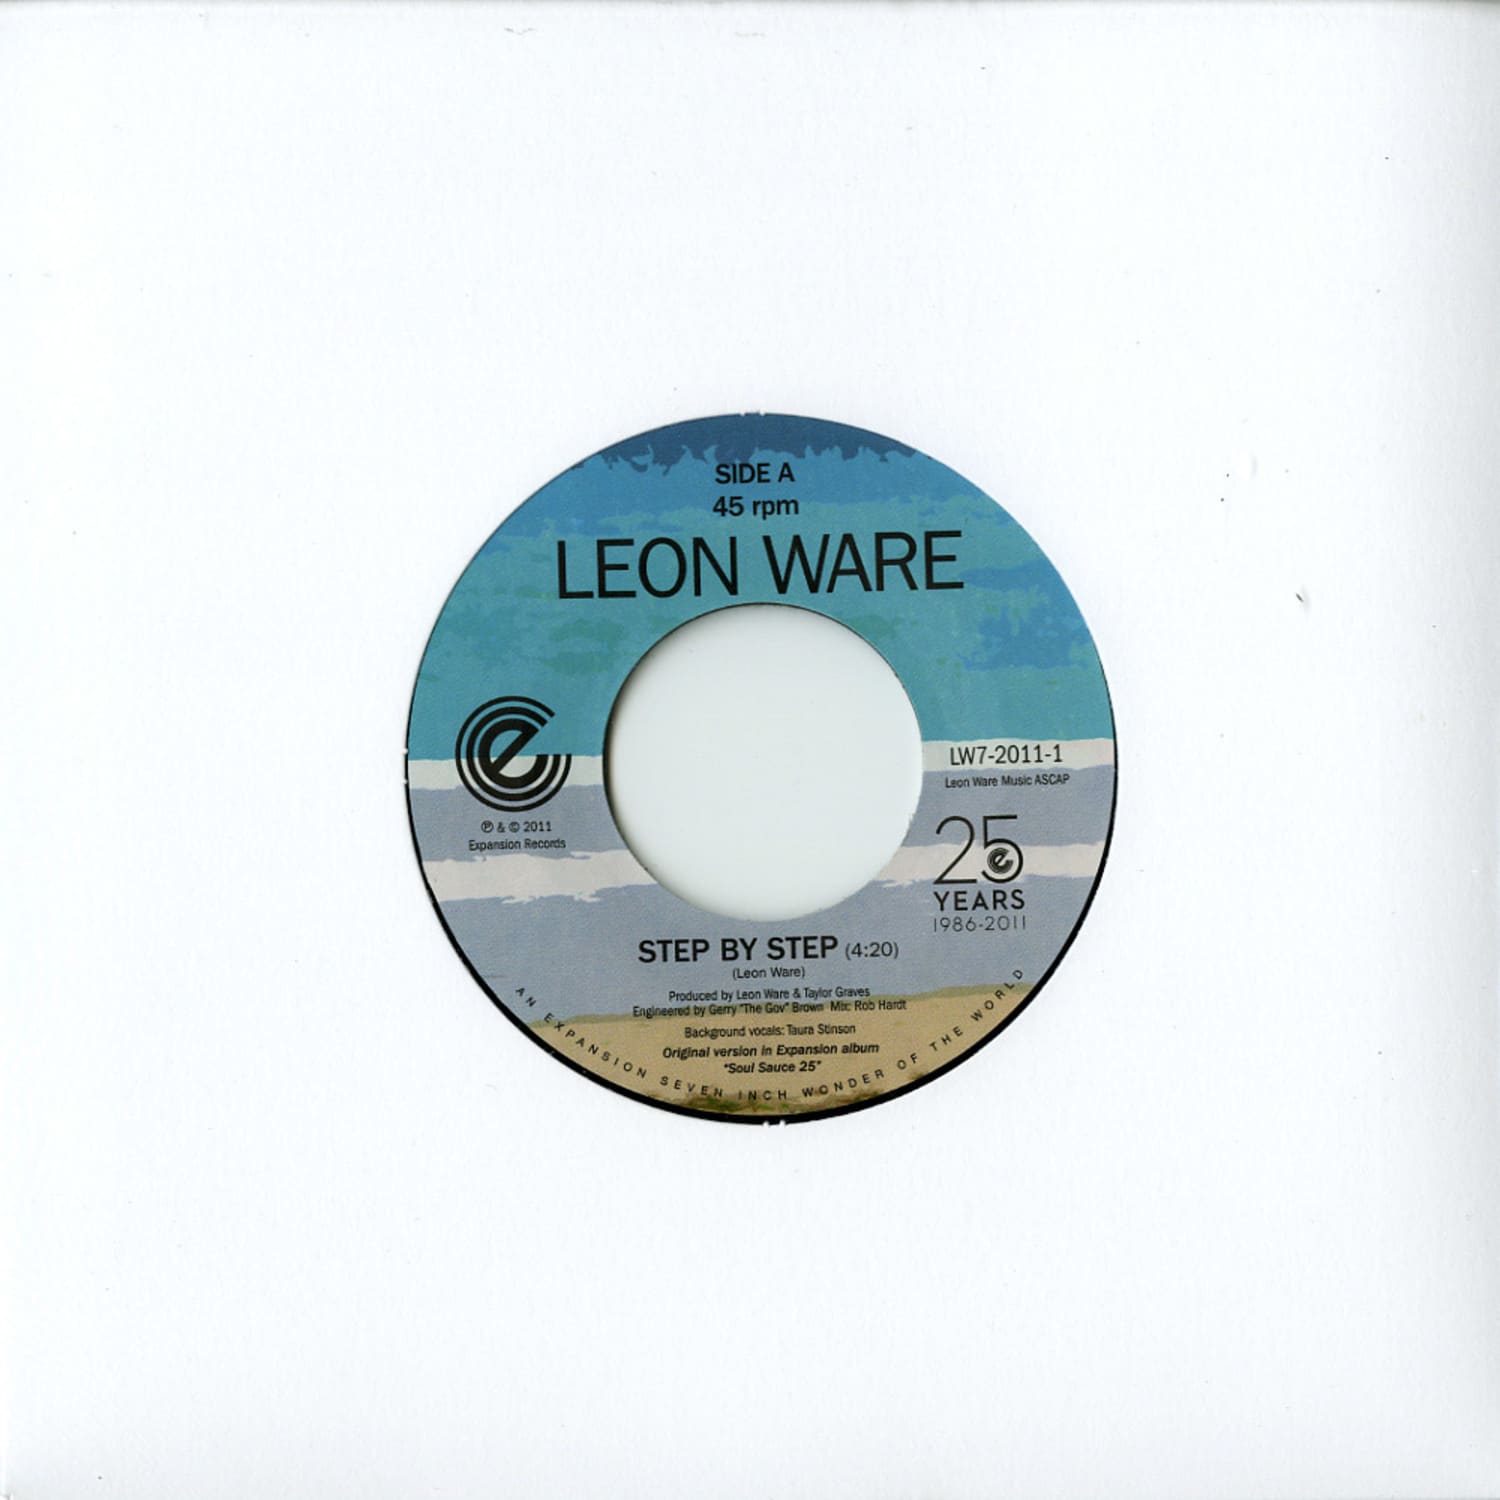 Leon Ware - STEP BY STEP / ON THE BEACH 